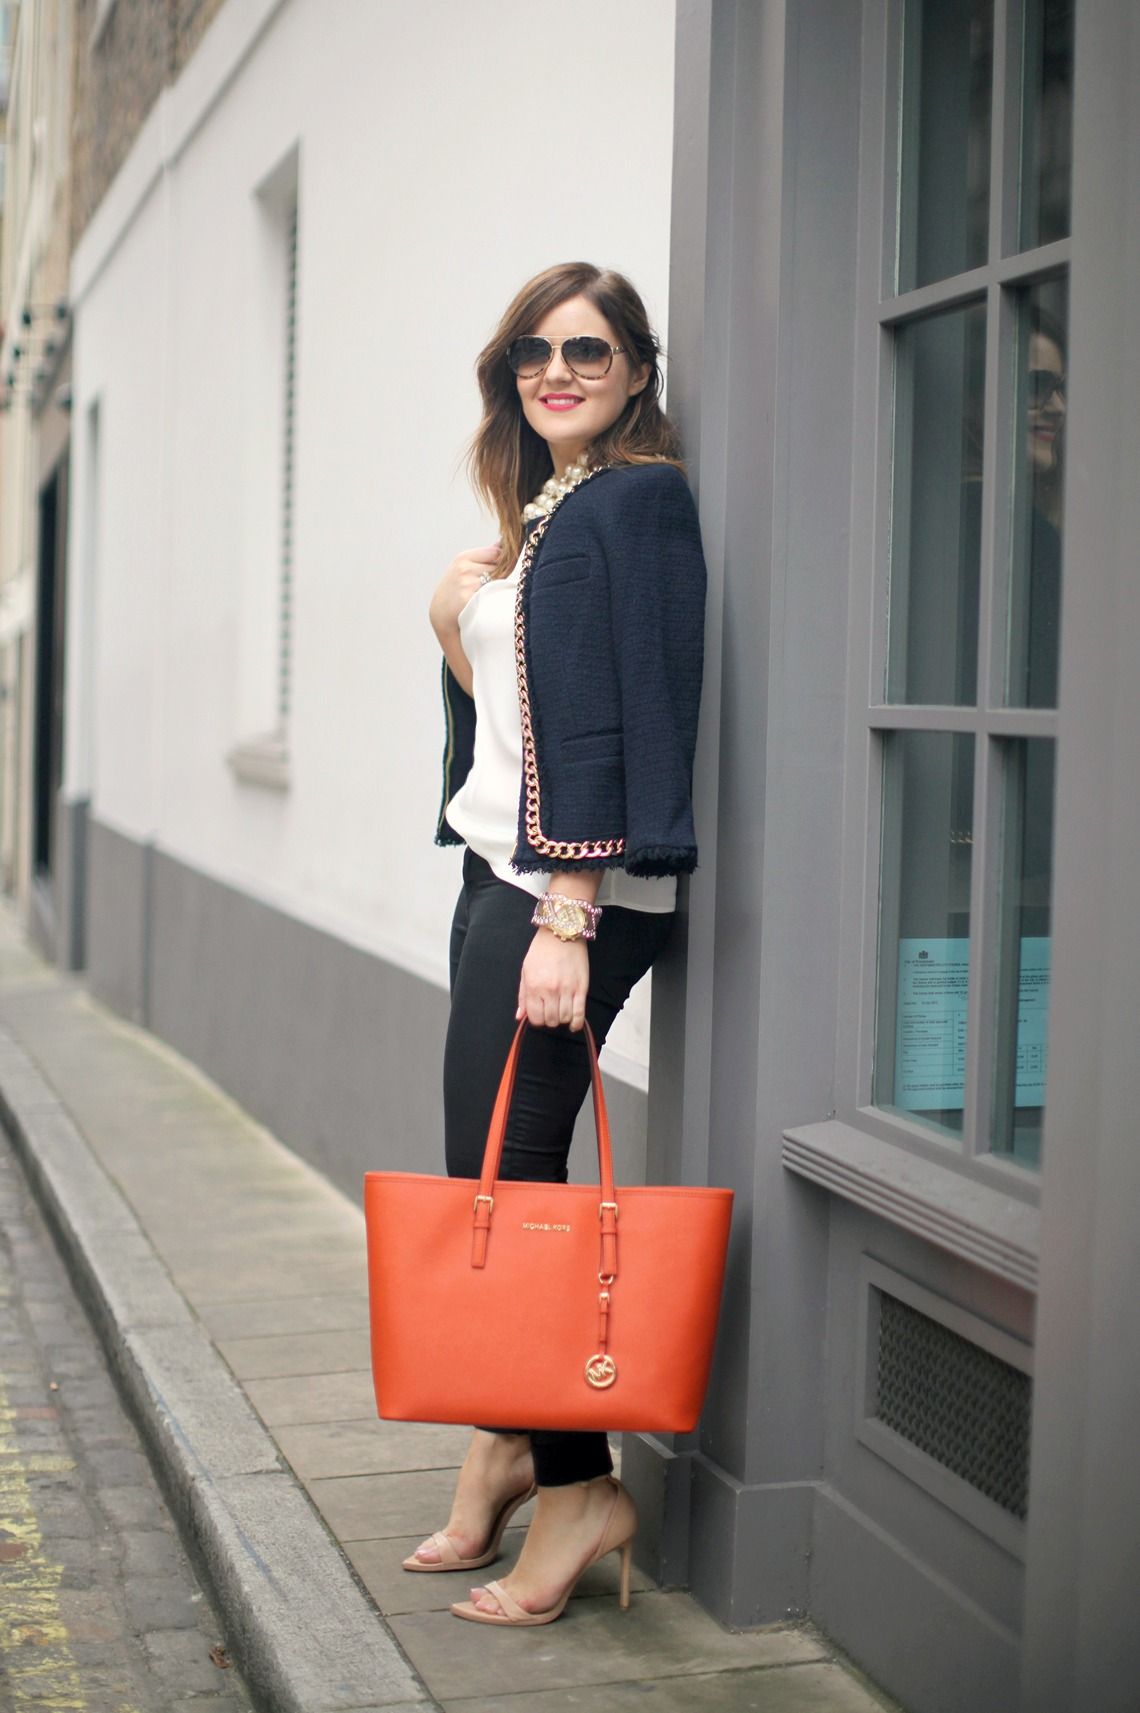 I like the tailored look of the cardigan, and the pop of color from ...